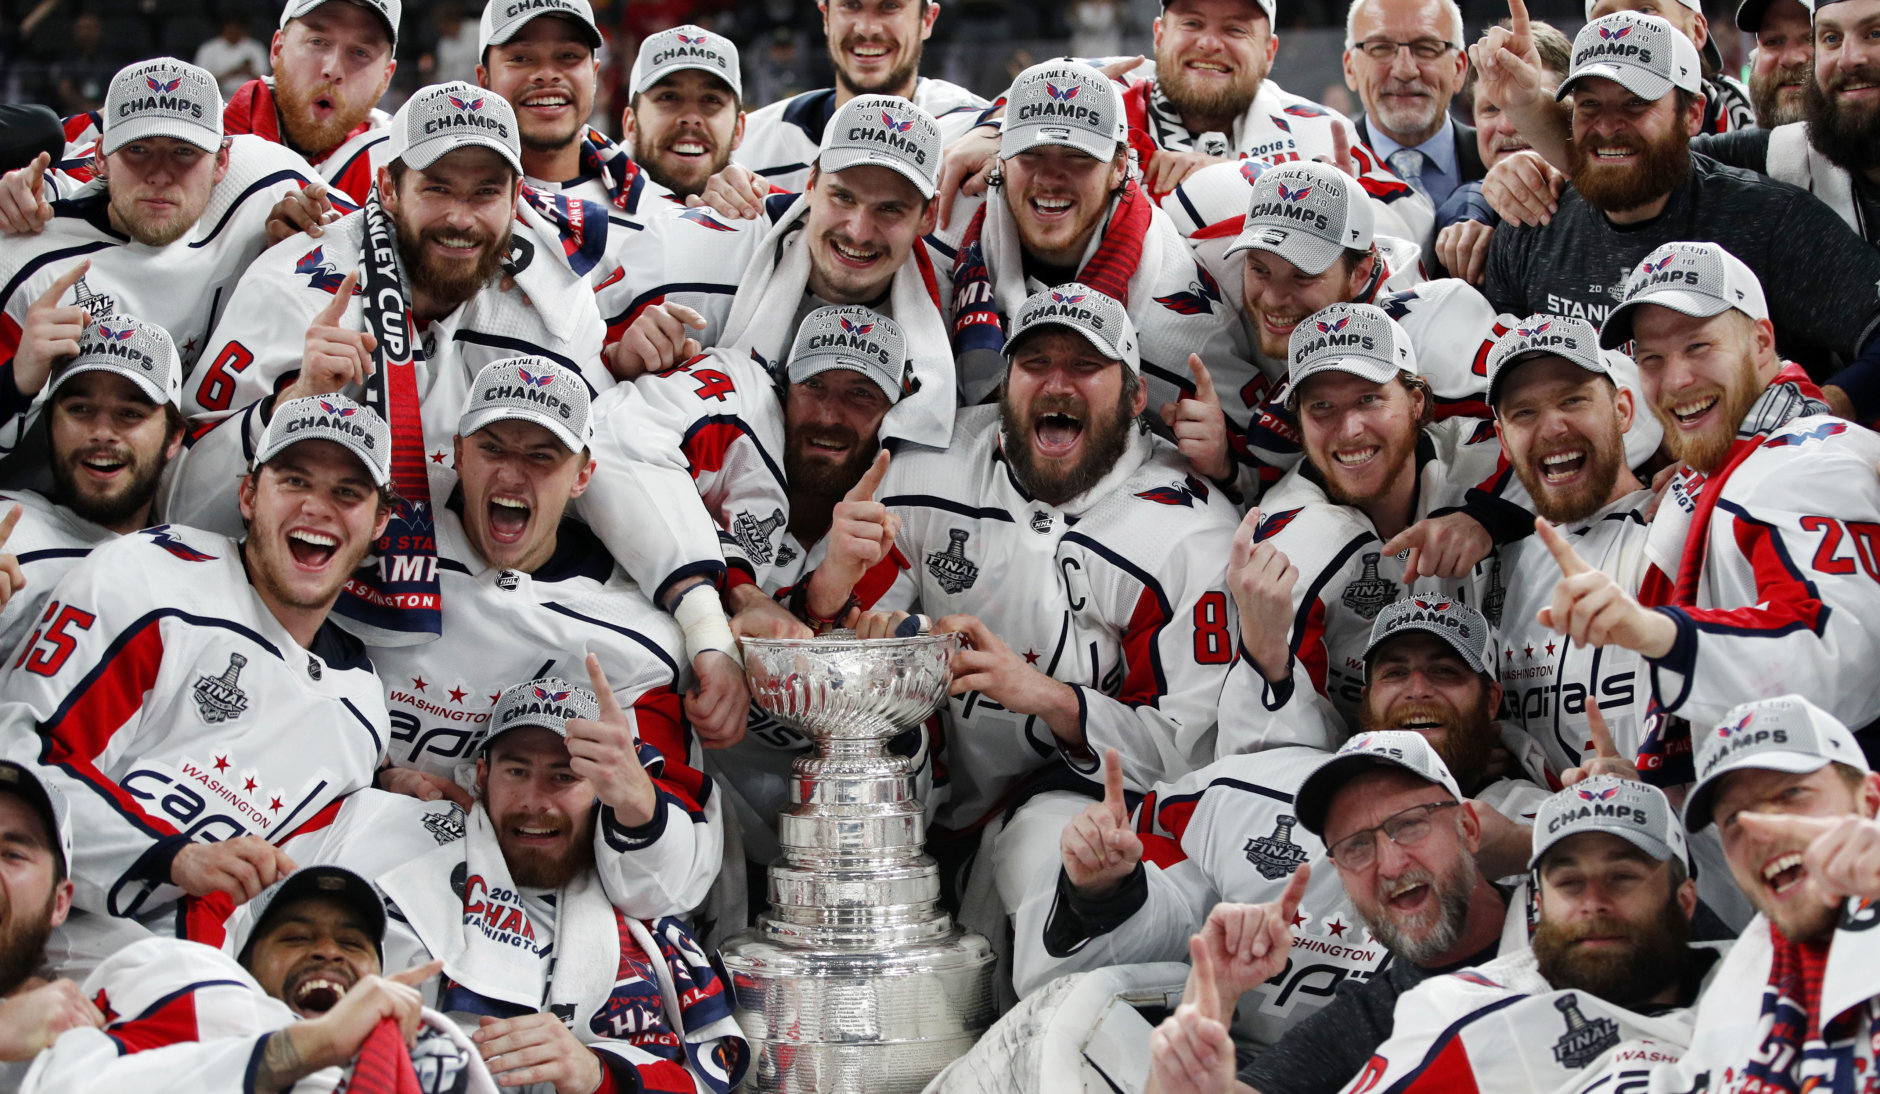 Members of the Washington Capitals pose with the Stanley Cup after the Capitals defeated the Golden Knights 4-3 in Game 5 of the NHL hockey Stanley Cup Finals Thursday, June 7, 2018, in Las Vegas. (AP Photo/John Locher)